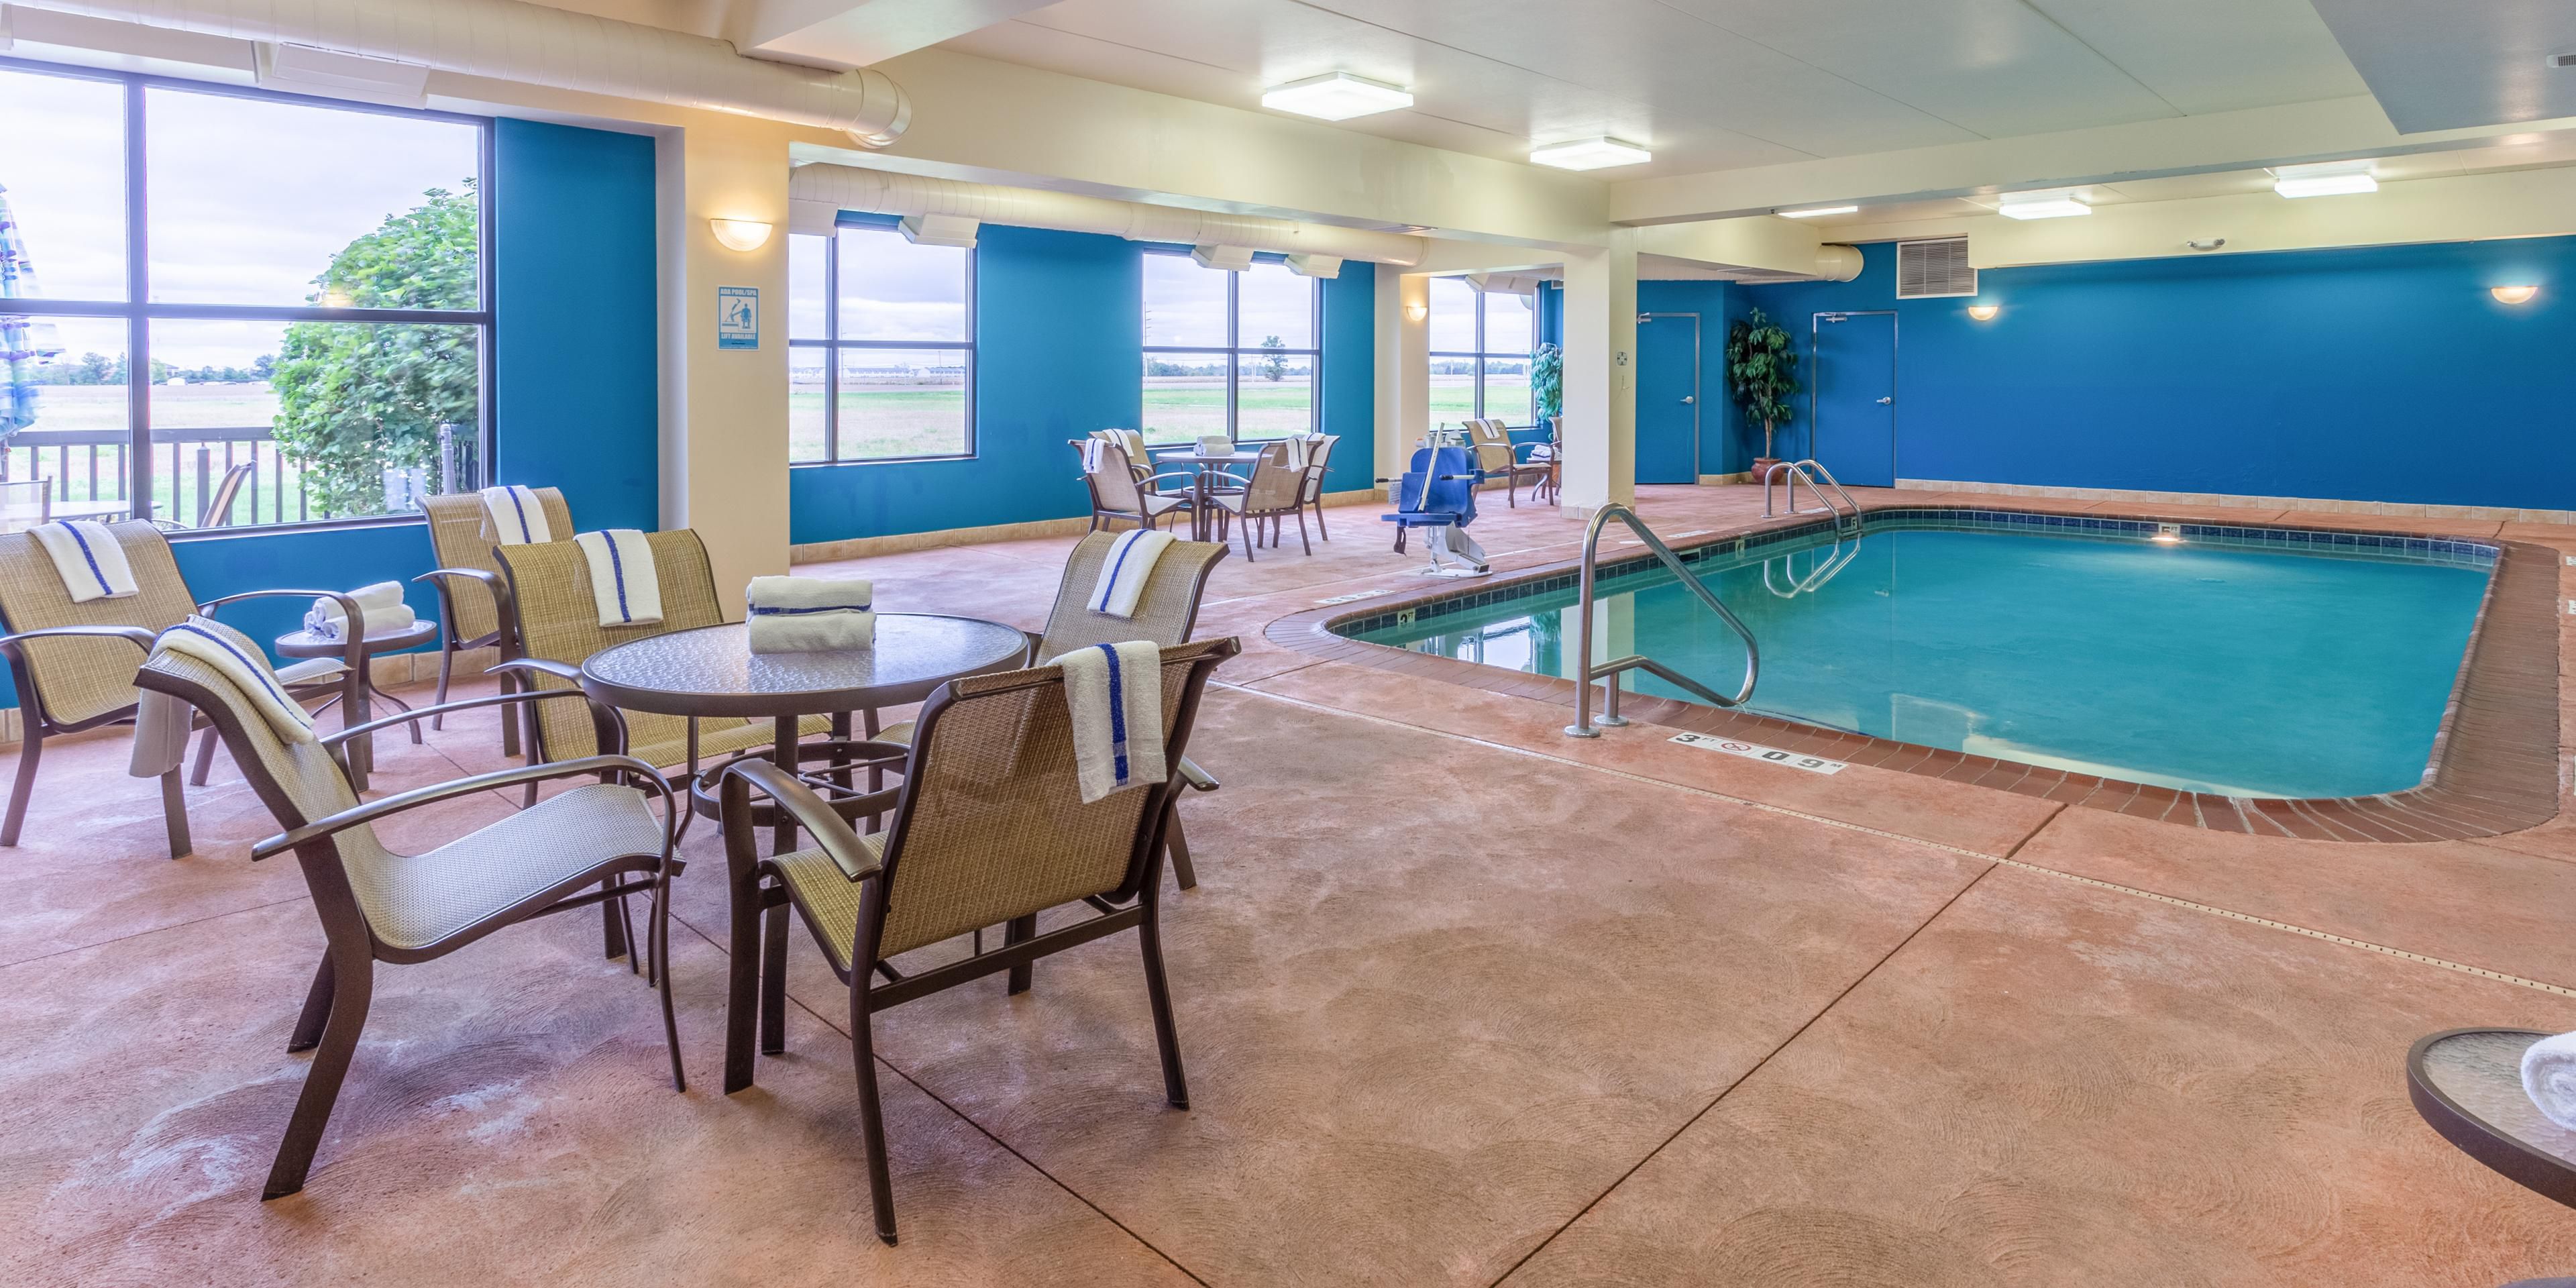 Come stay and play in our indoor pool as the temperature begins to fall.  We look forward to hosting you.